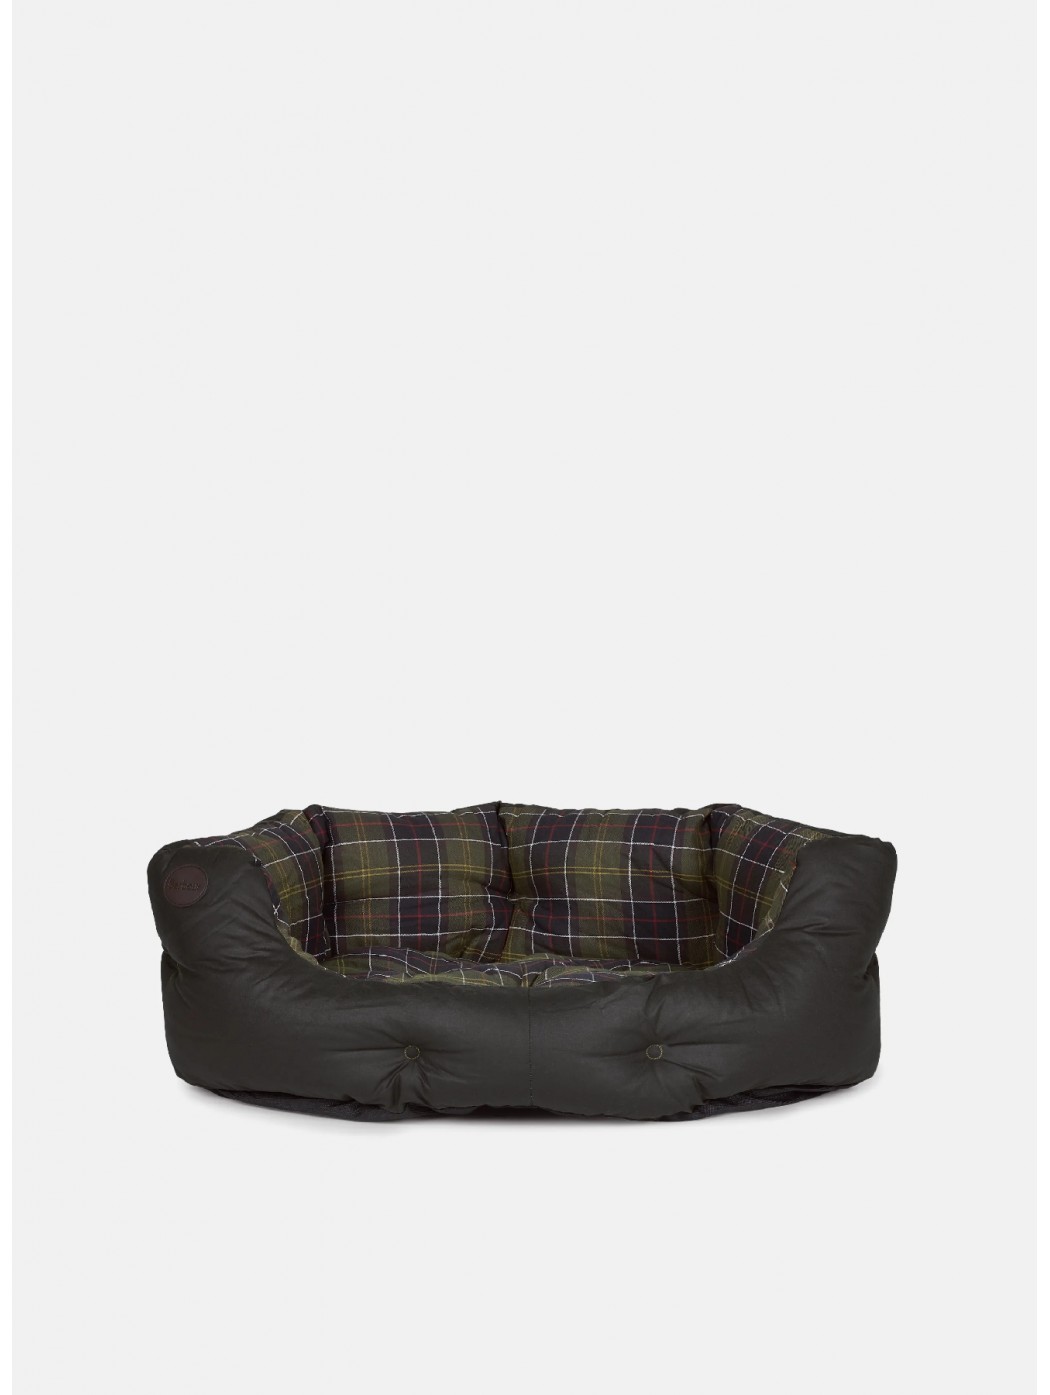 WAXCOTTON DOG BED 24IN...